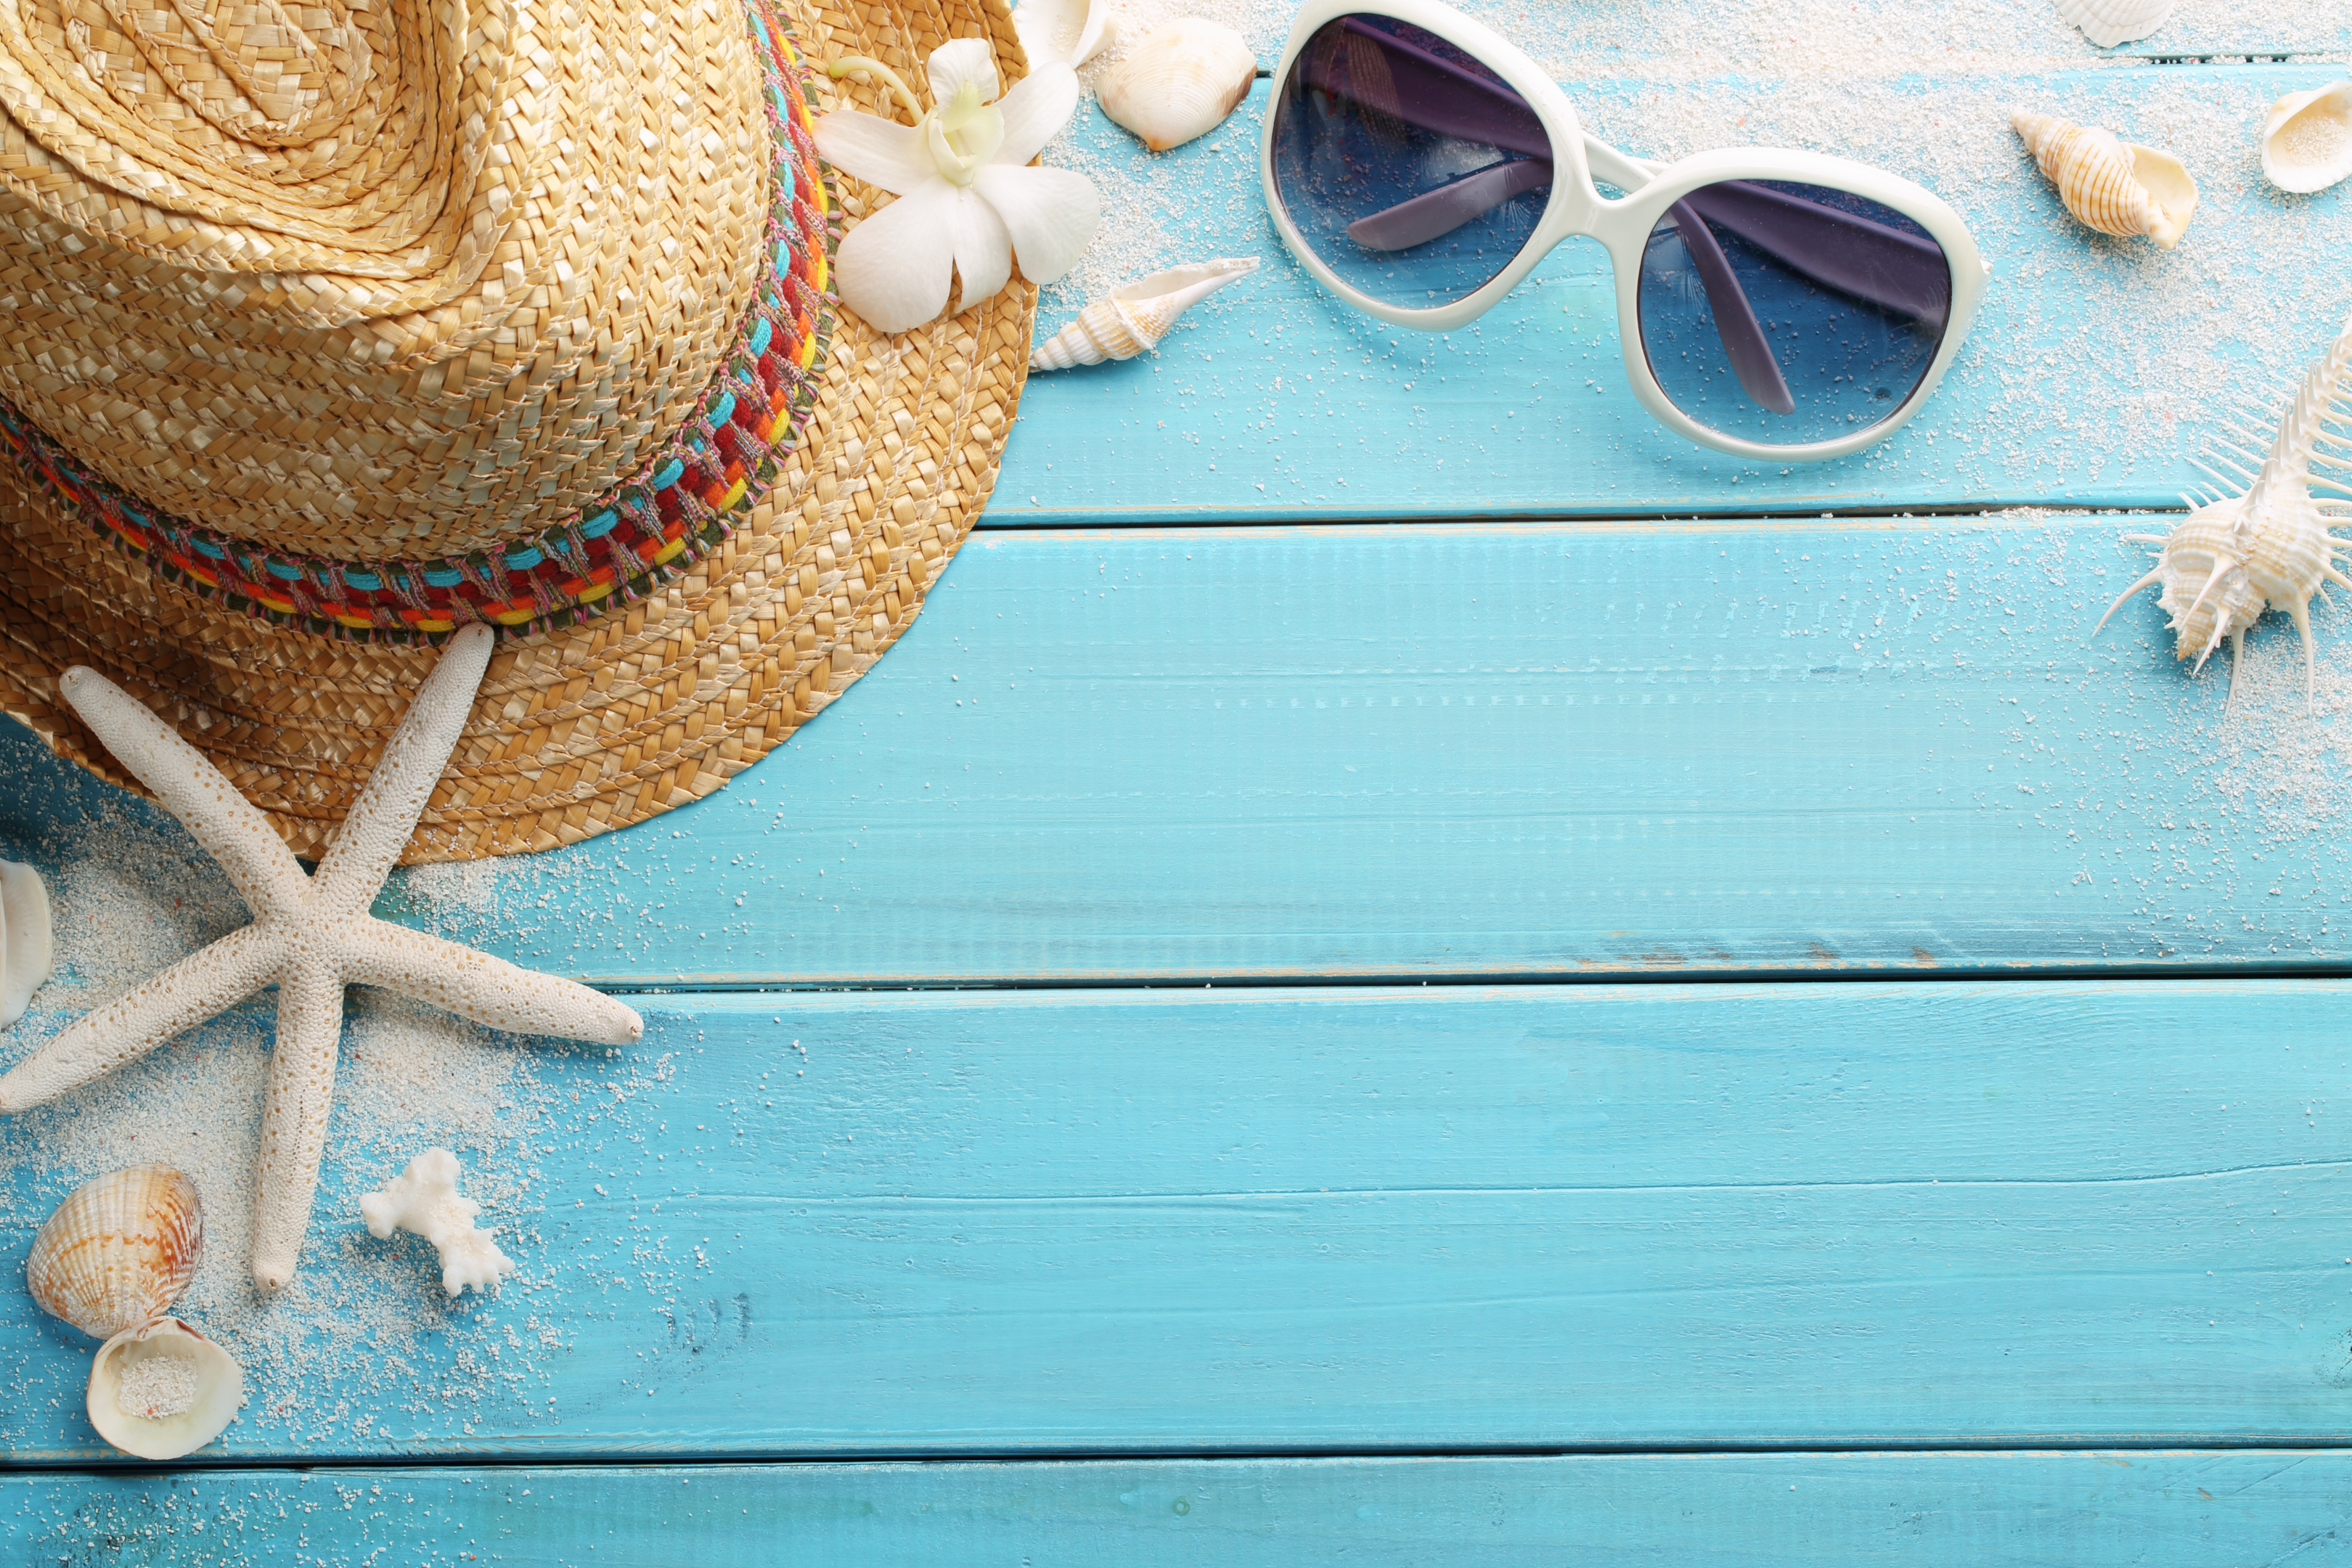 Straw Hat and Shades (Shutterstock)